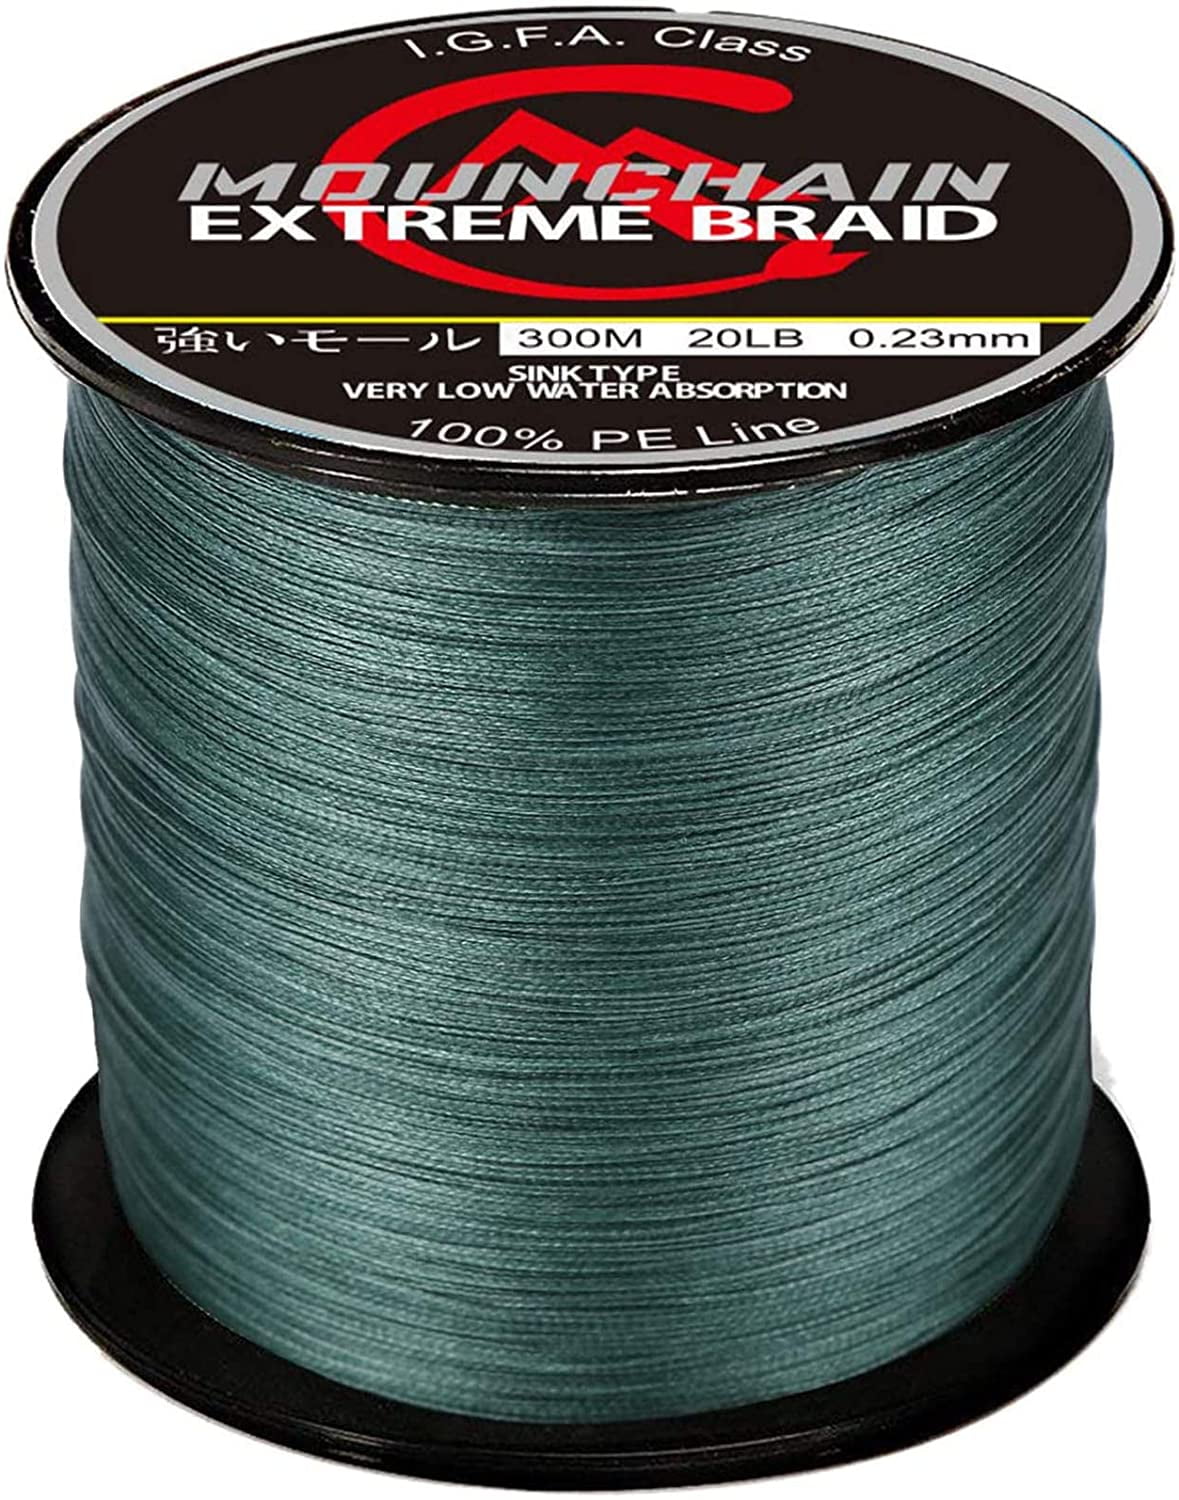 1000M Super Strong 4 Strand Pro PE Power Braided Fishing Line 1000 YD NEW! 